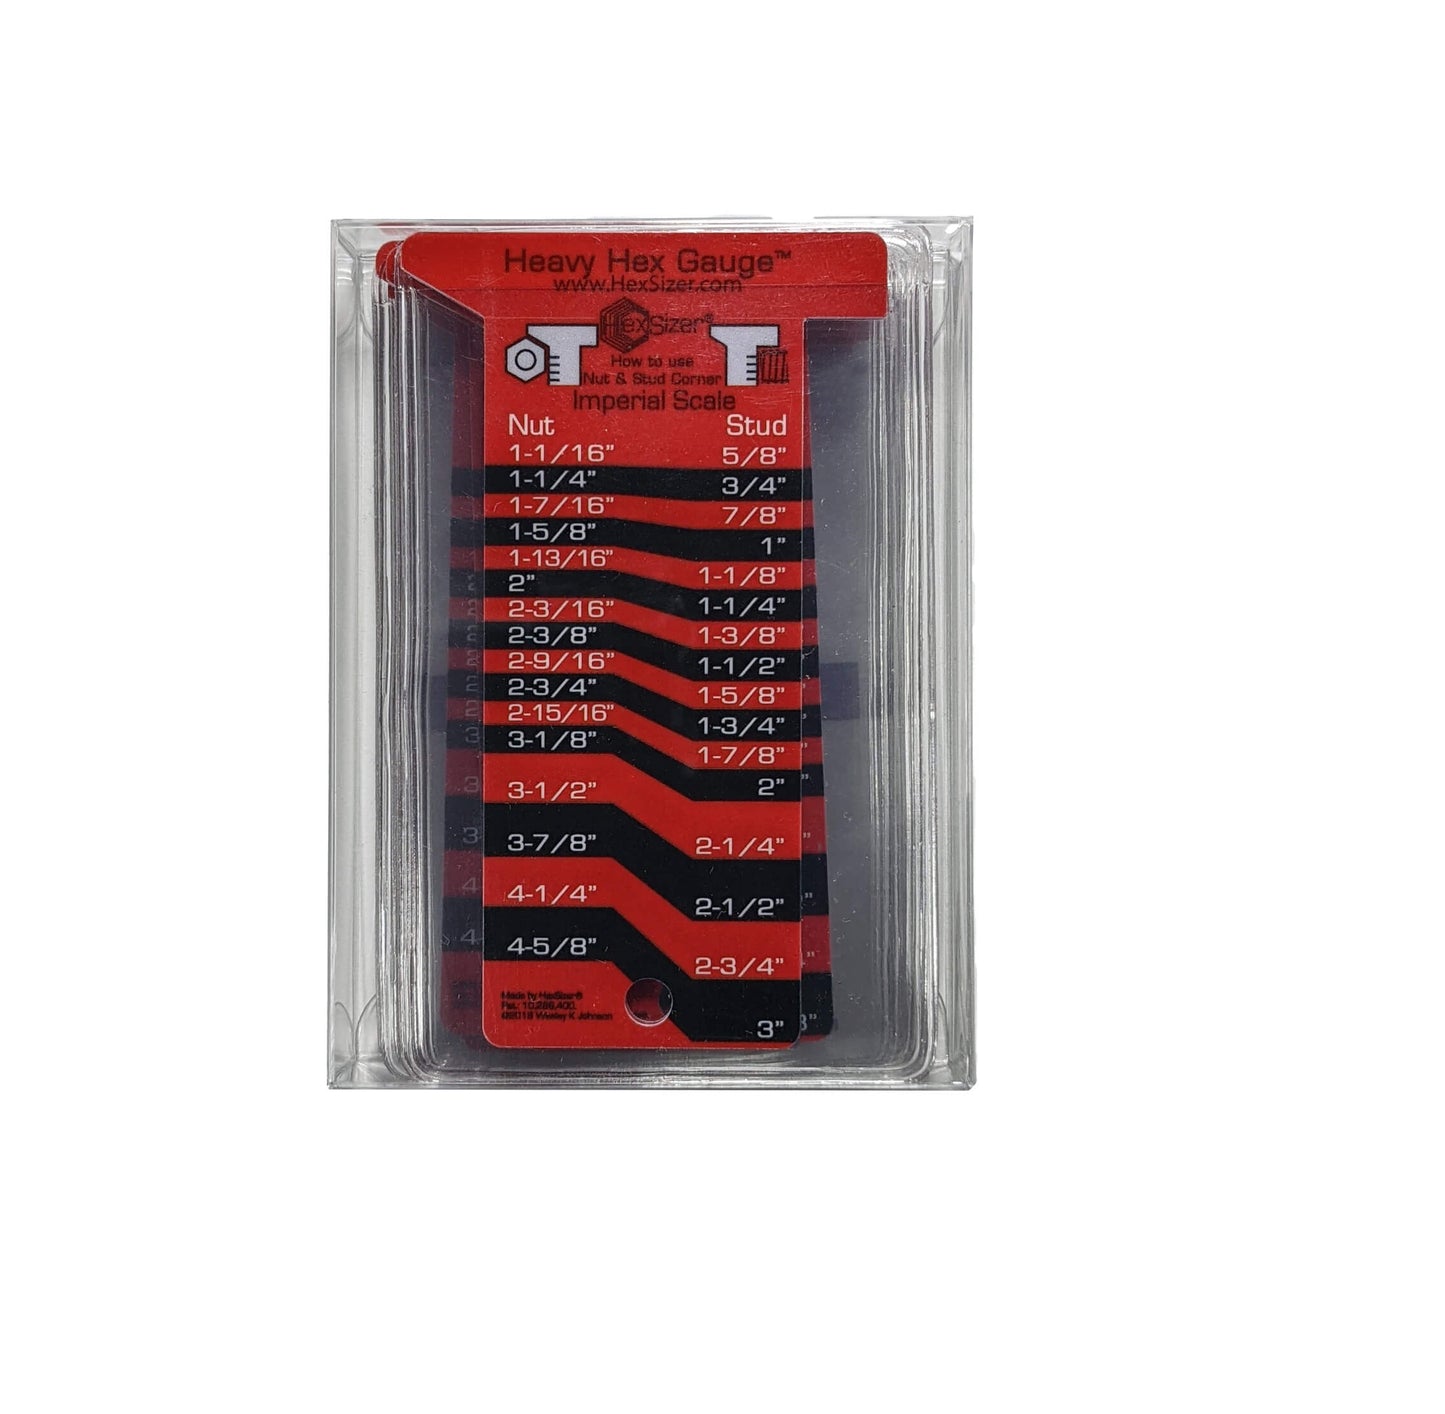 10 Pack with sleeves - Black on Red - Plastic Heavy Hex Gauge - Inch Only